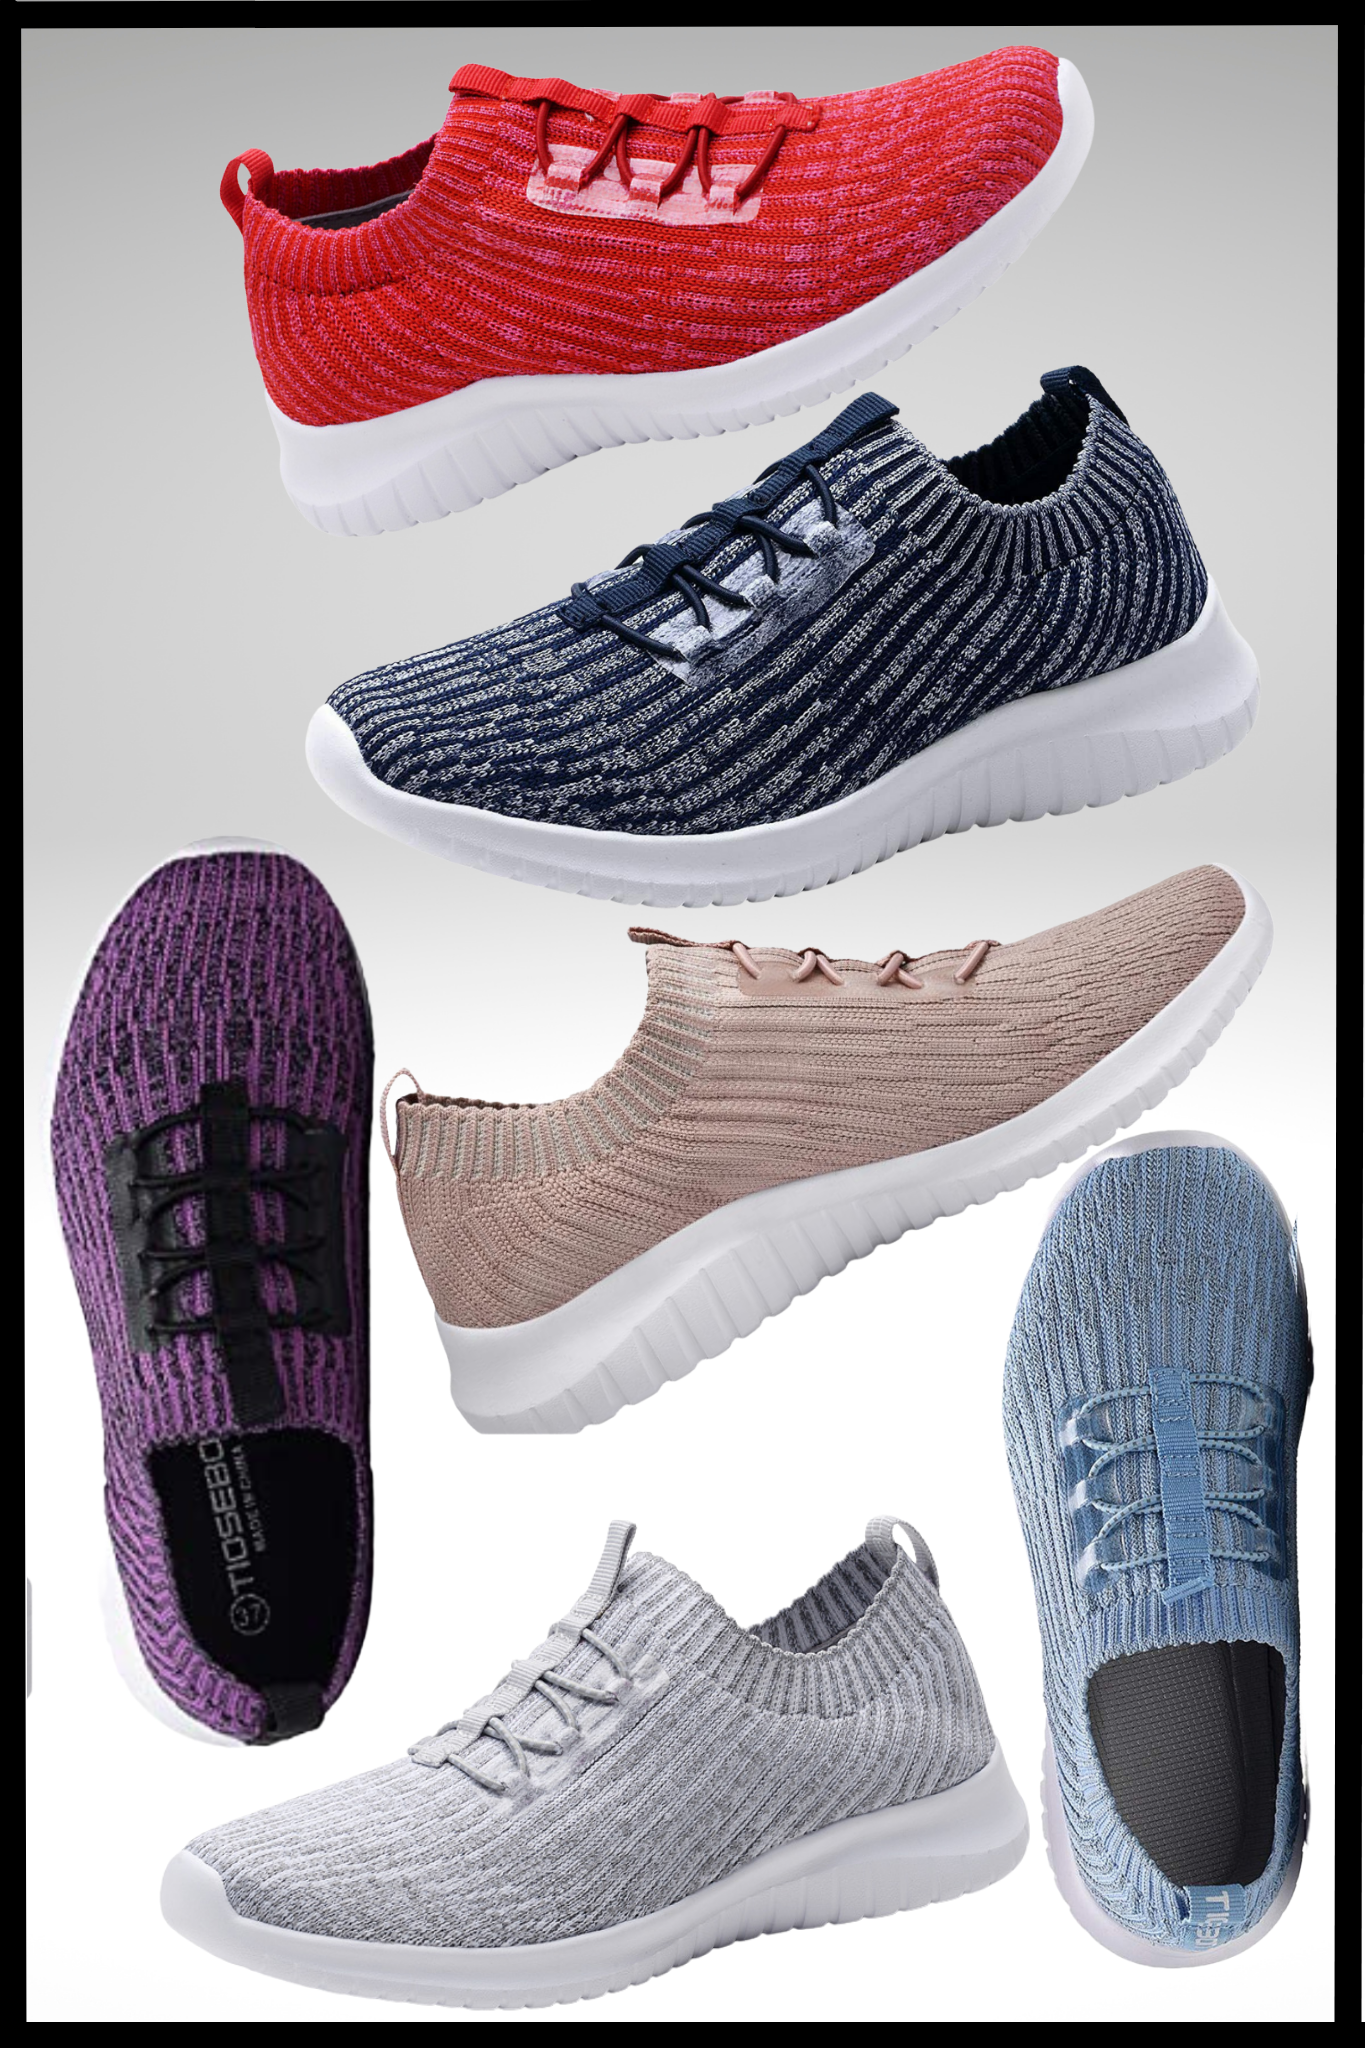 Knitted Slip-On Walking Shoes Sizes 10-13: 2122 (FINAL SALE)